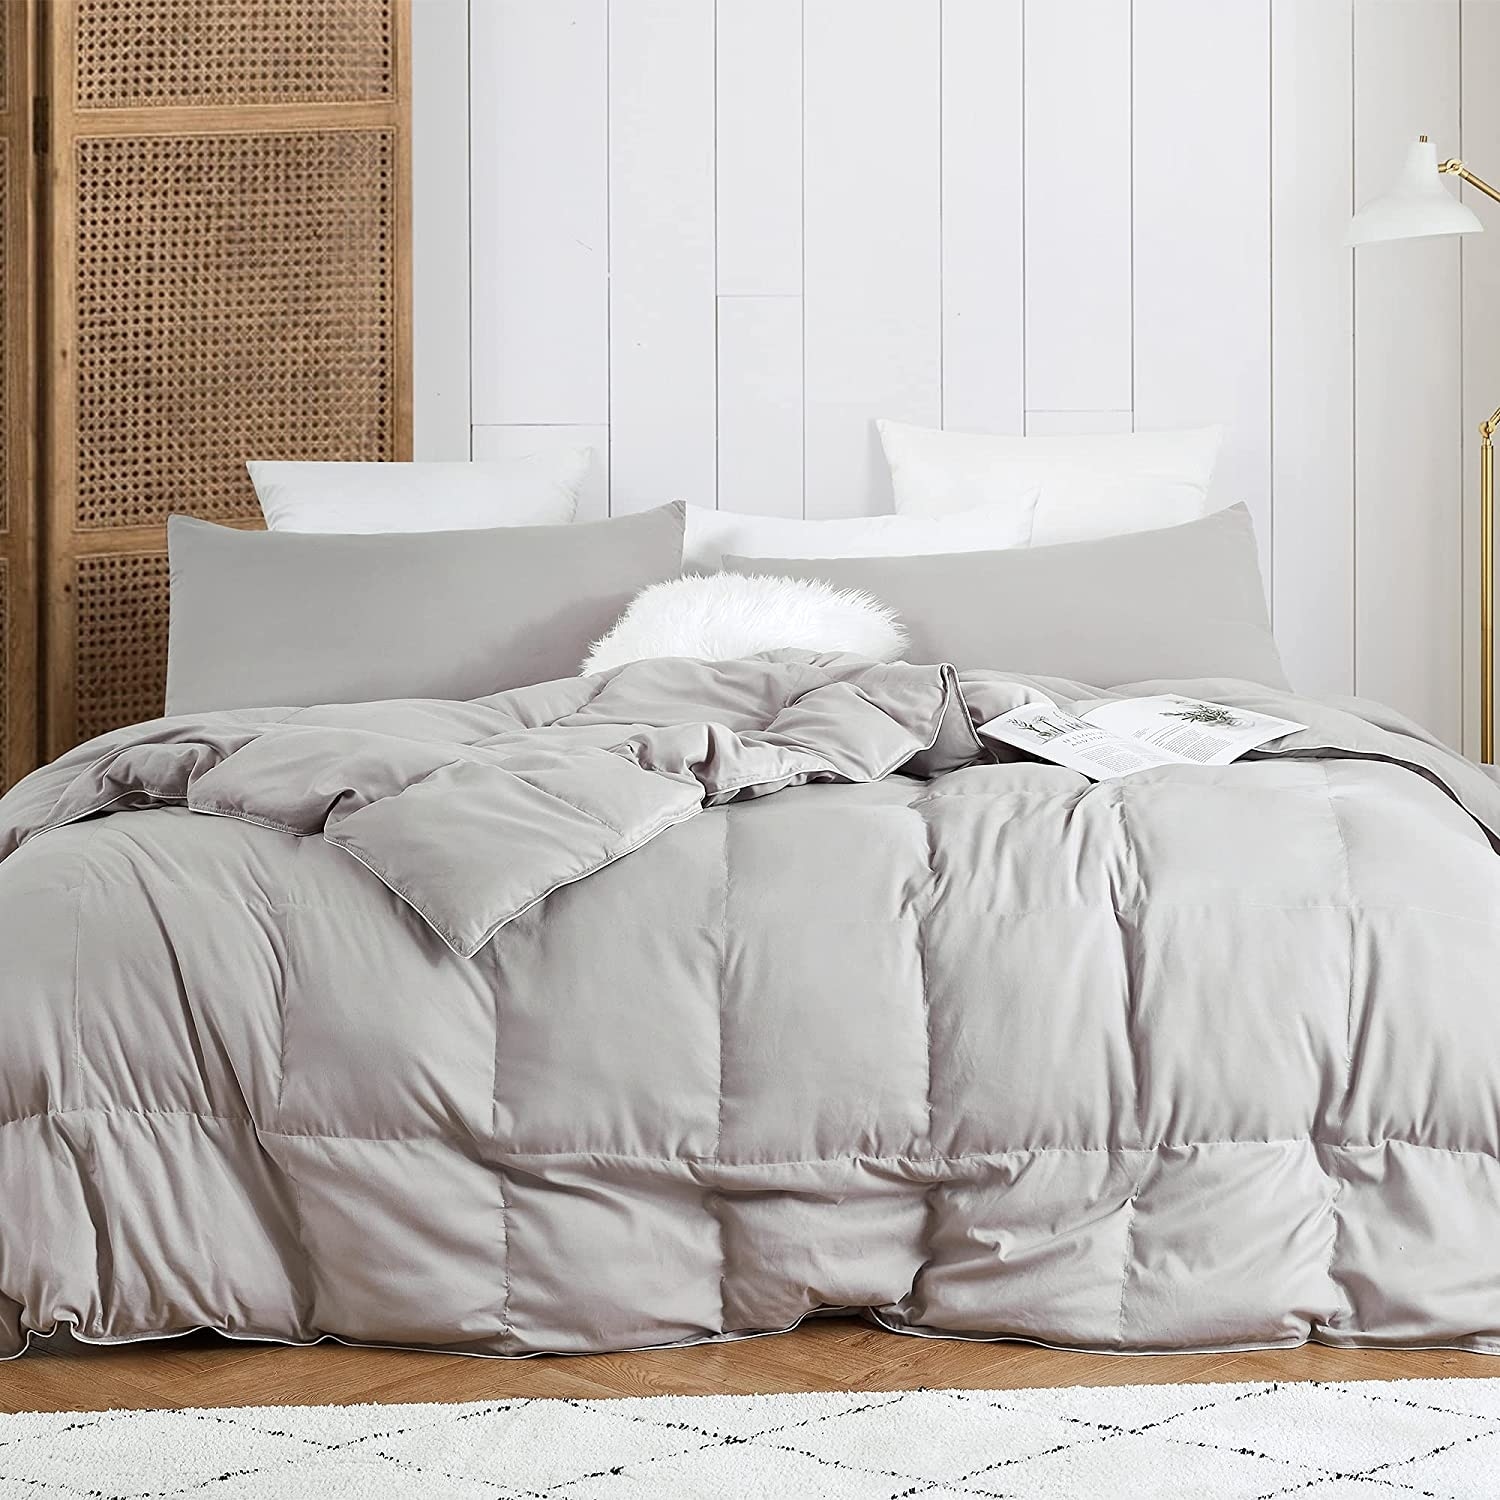 https://ak1.ostkcdn.com/images/products/is/images/direct/b9b7880466c44a9c5f4746b85f47a61fdfc254cf/Snorze-Cloud-Comforter---Coma-Inducer%C2%AE-Oversized-Bedding-in-Silver-Cloud.jpg